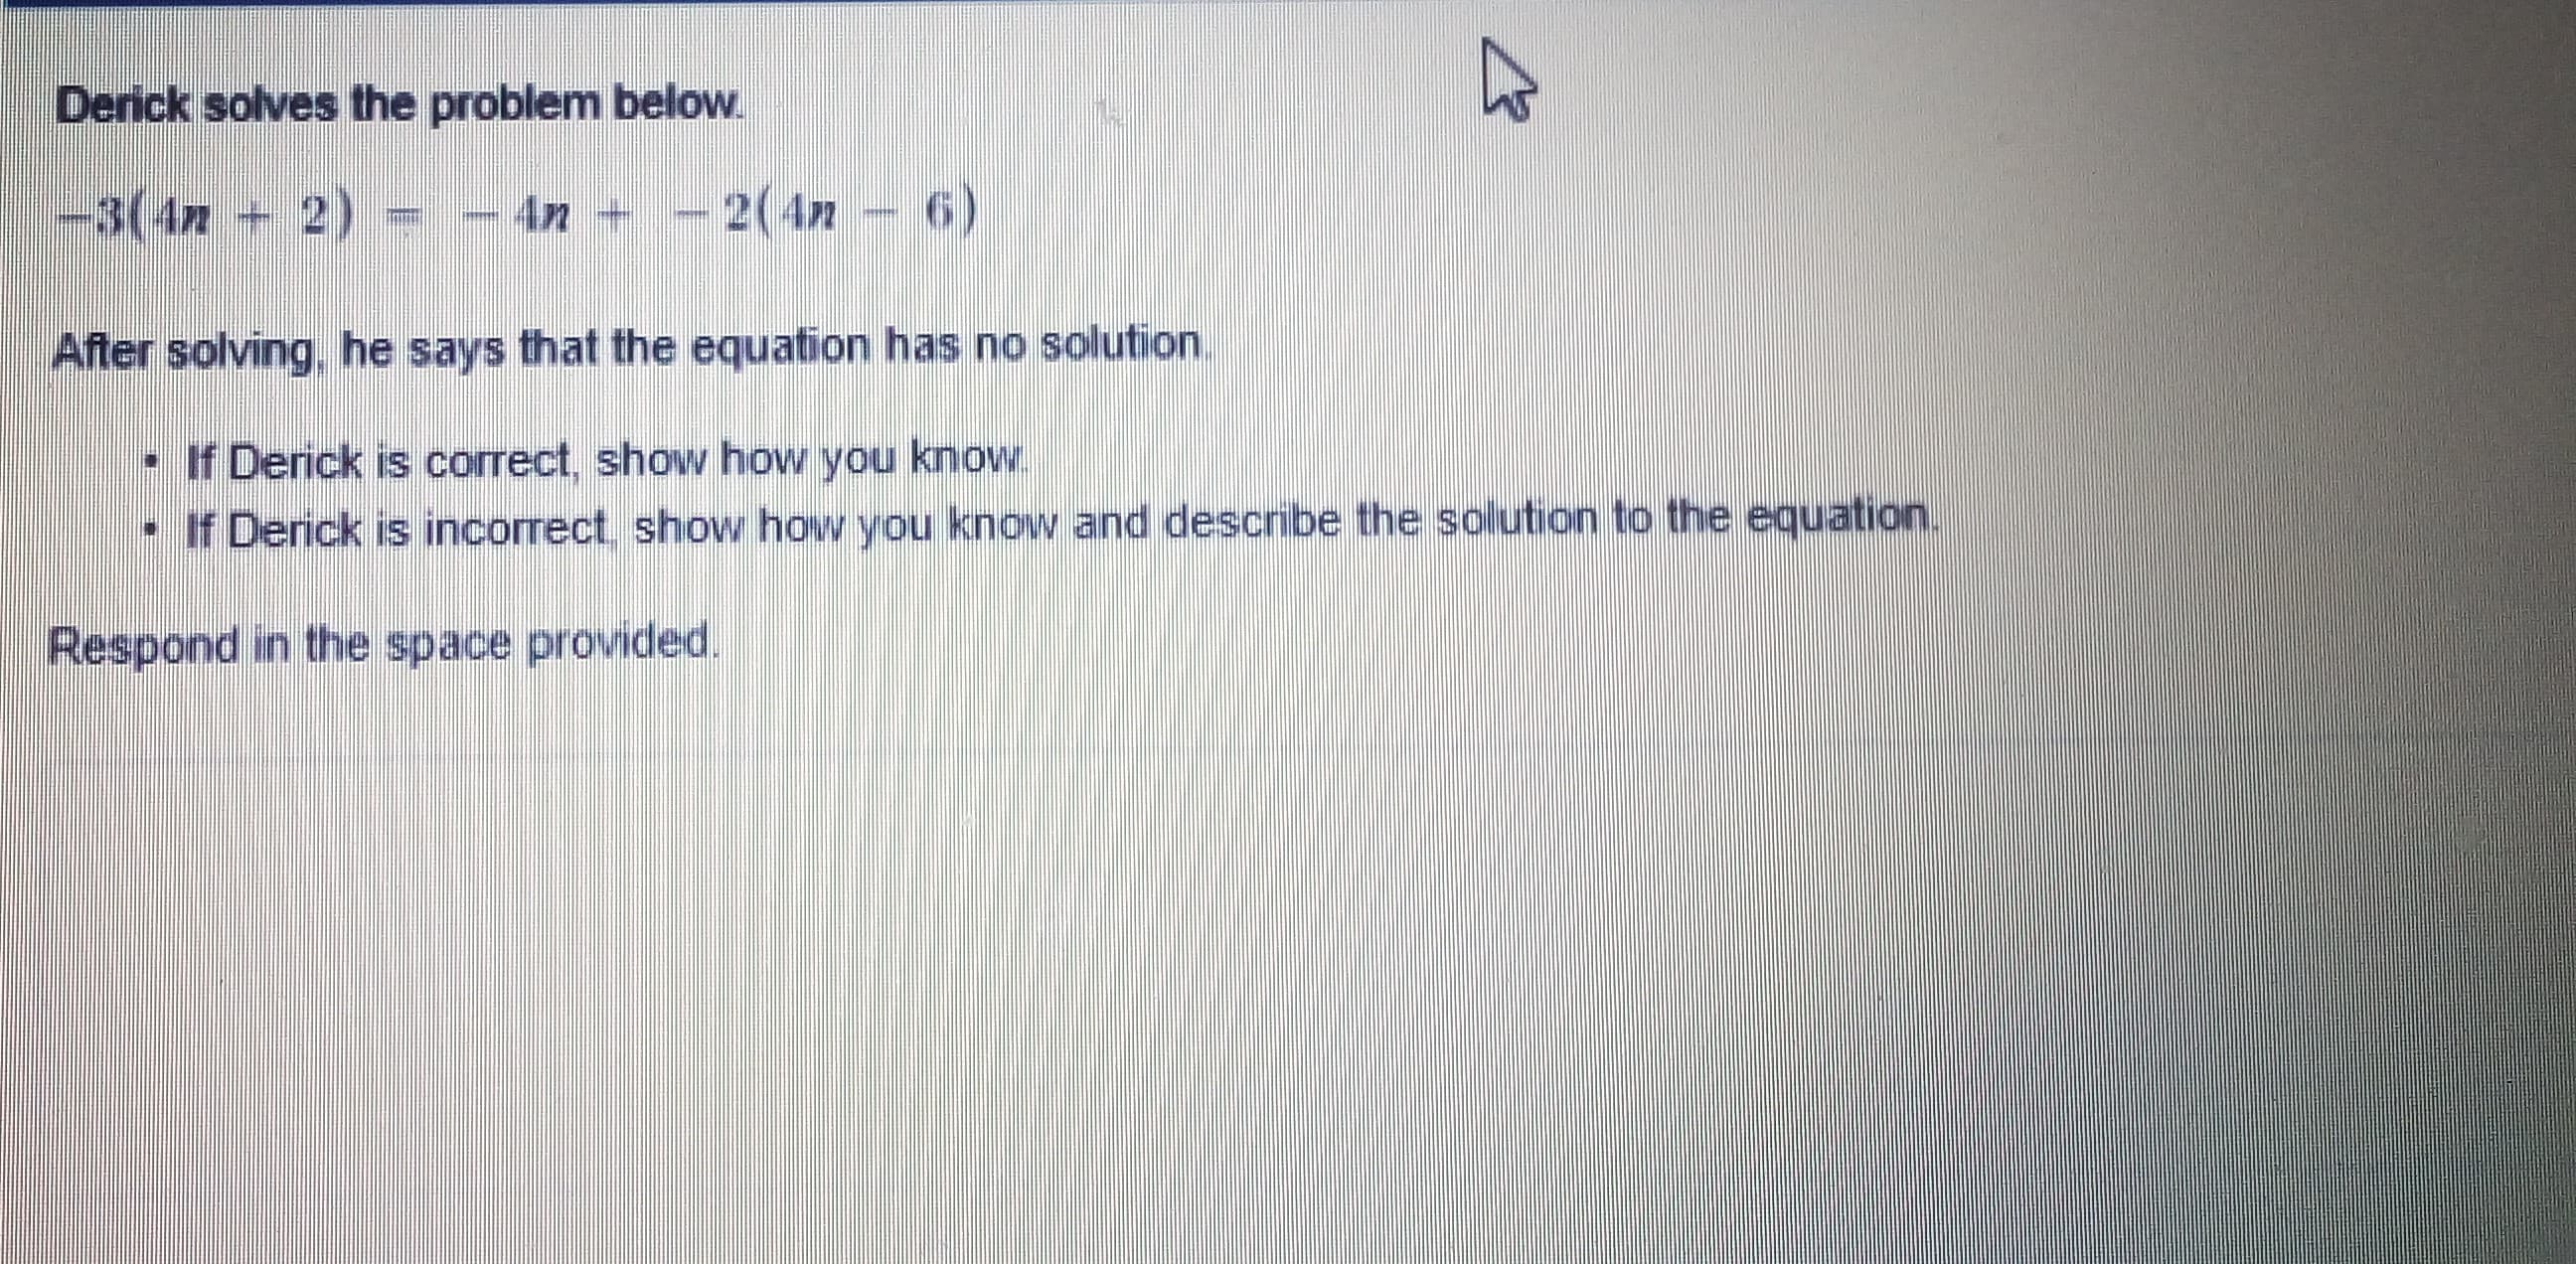 Derick solves the problem below.
-3(4n+ 2)
4n + - 2(4n – 6)
After solving. he says that the equation has no solution.
• If Derick is correct, show how you know.
- If Derick is incorrect show how you know and describe the solution to the equation.
Respond in the space provided.
